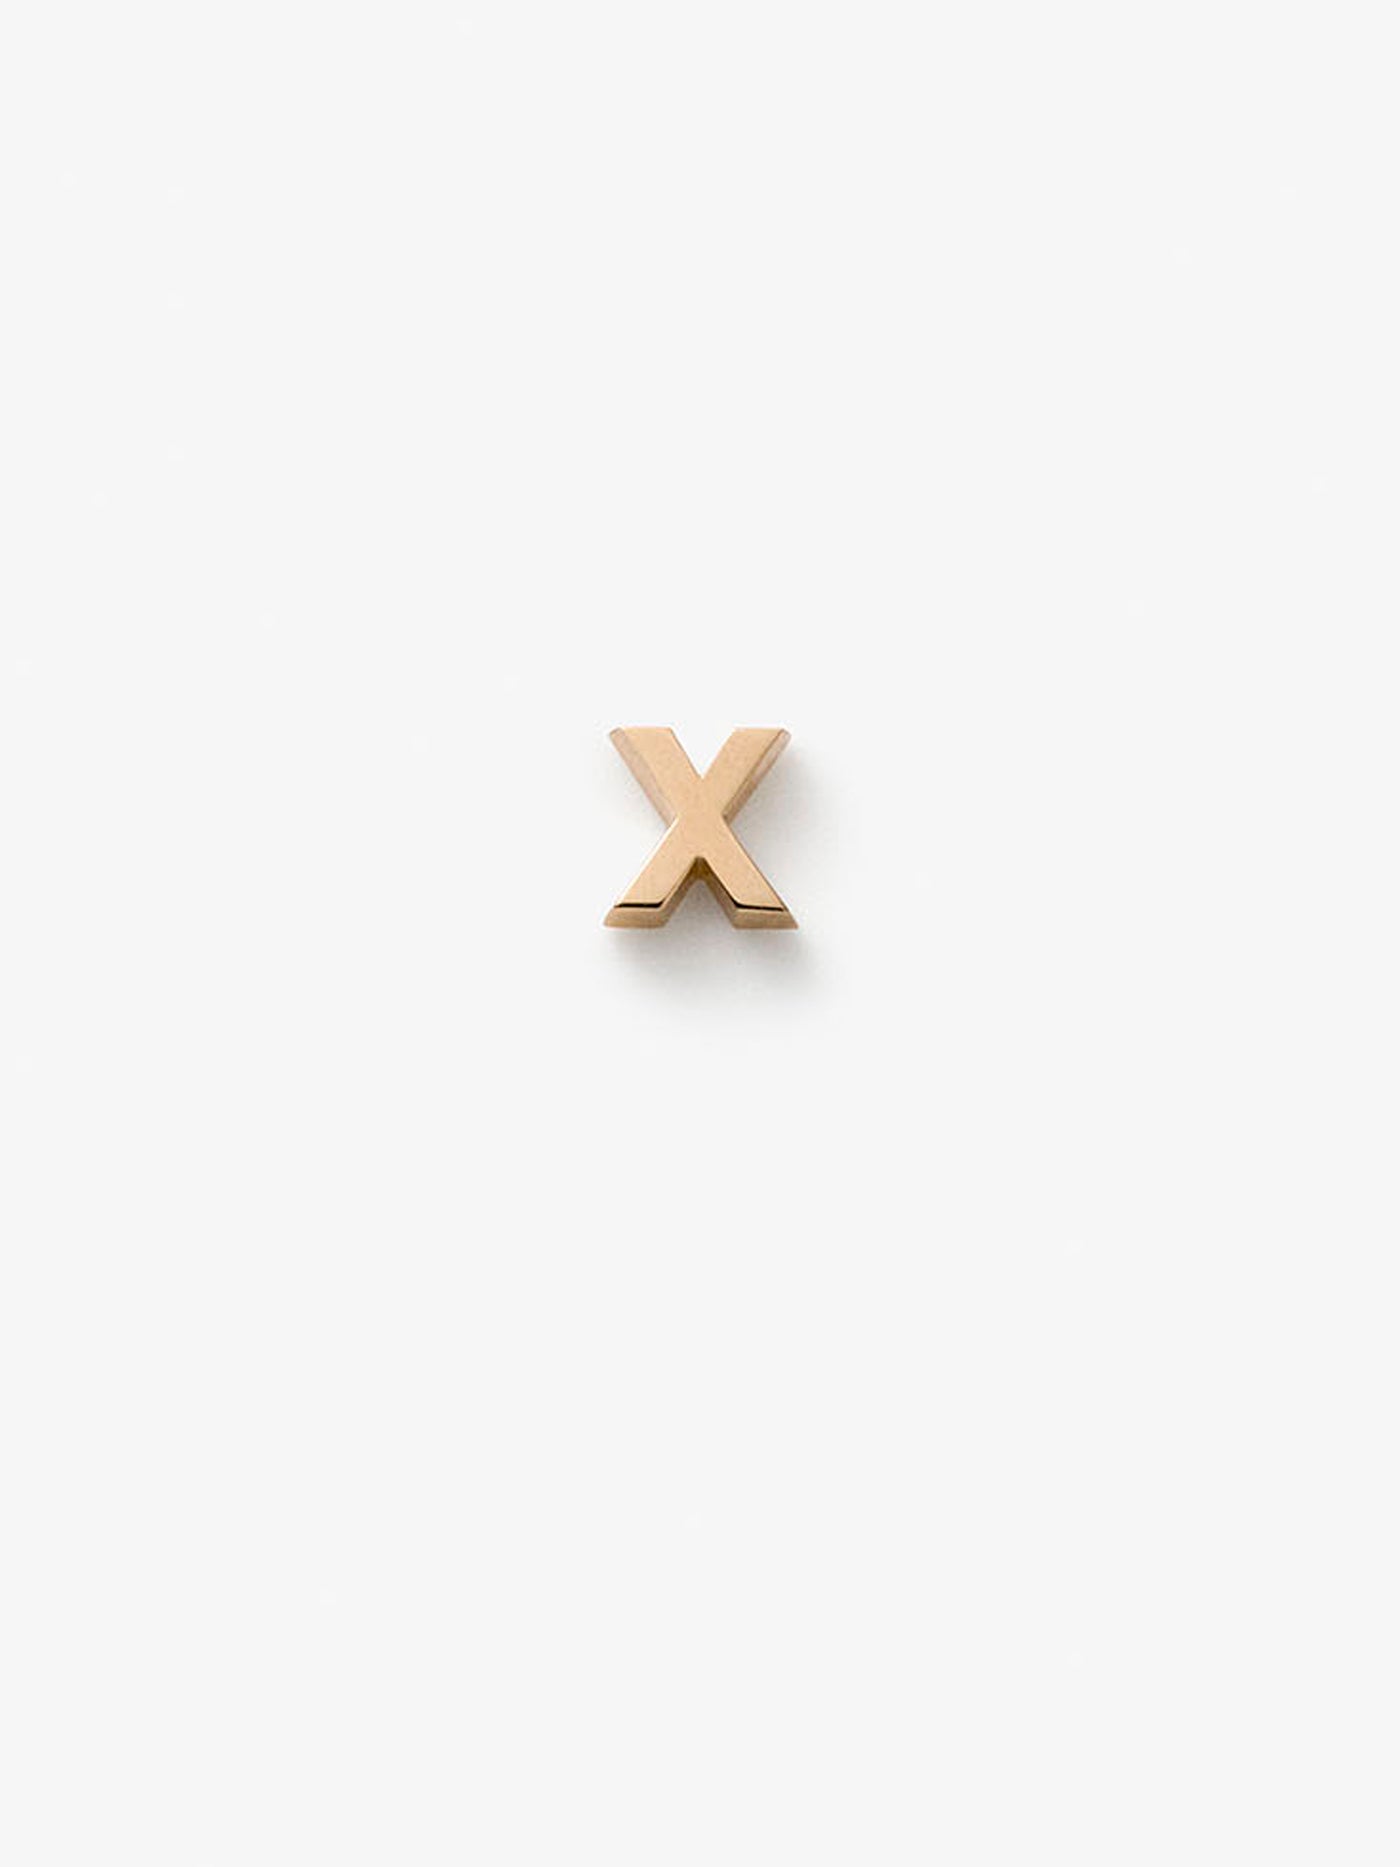 One Letter X in 18k Gold